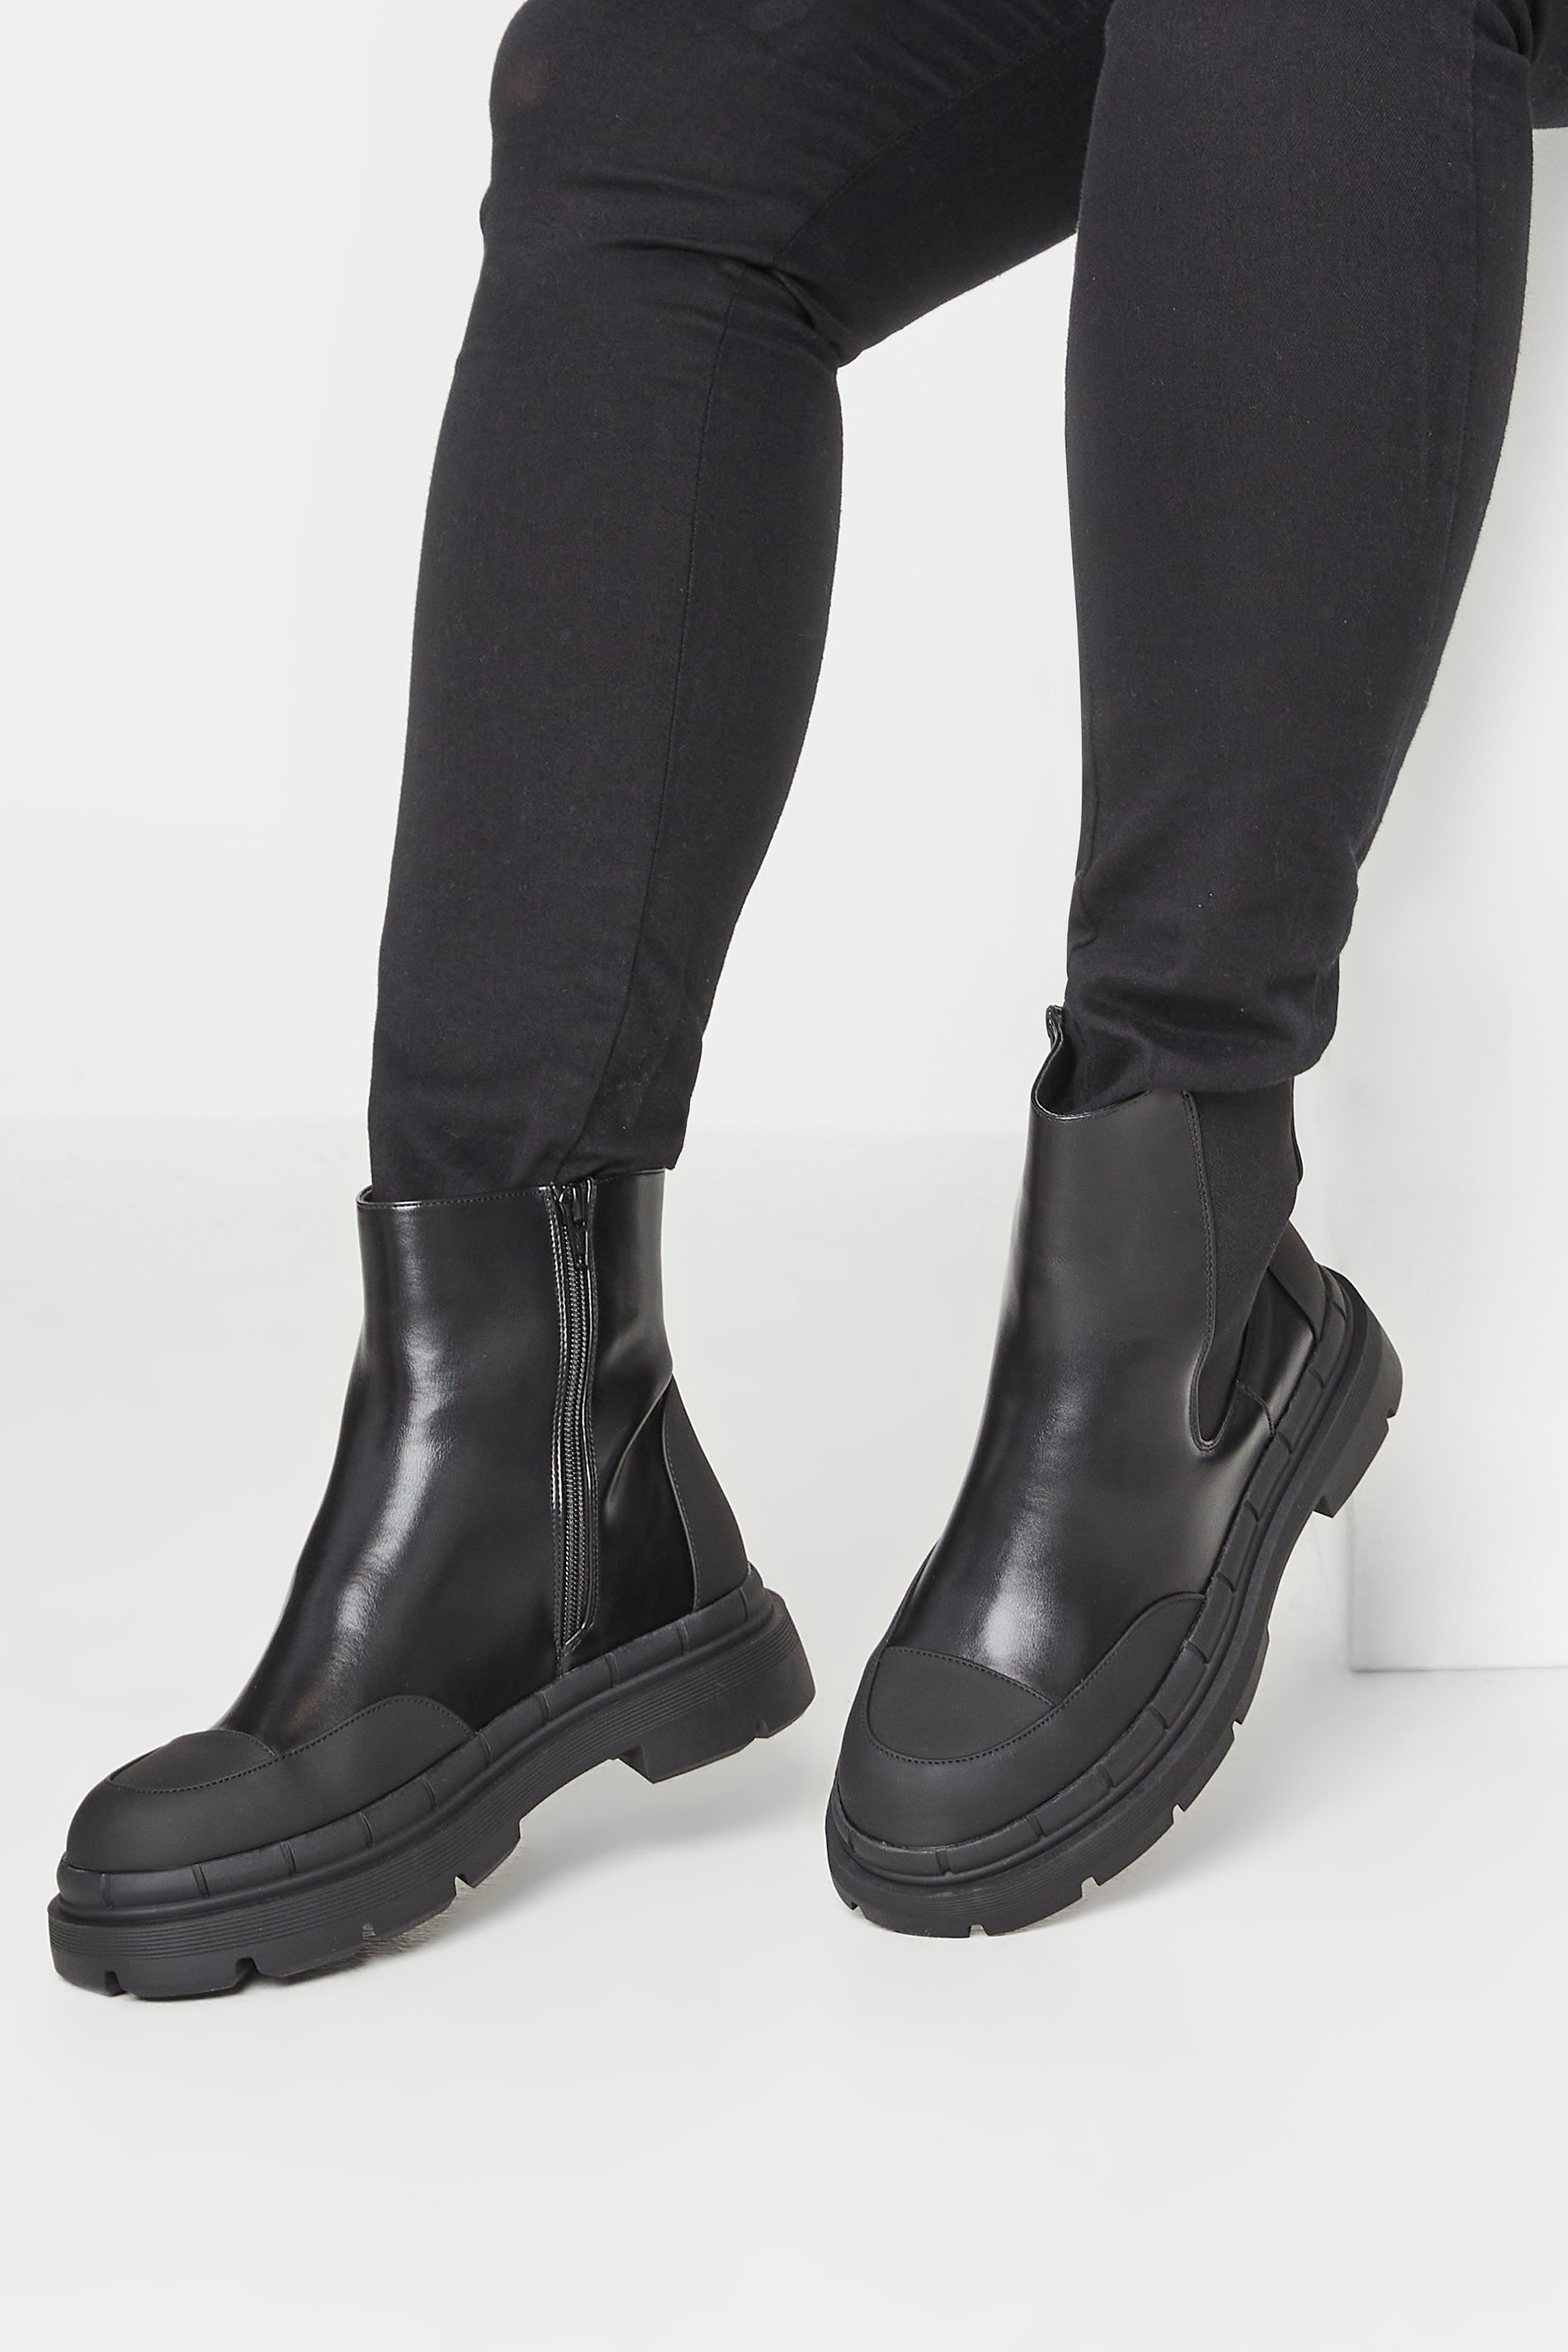 Black Chunky High Chelsea Boots In Wide E Fit | Yours Clothing  1